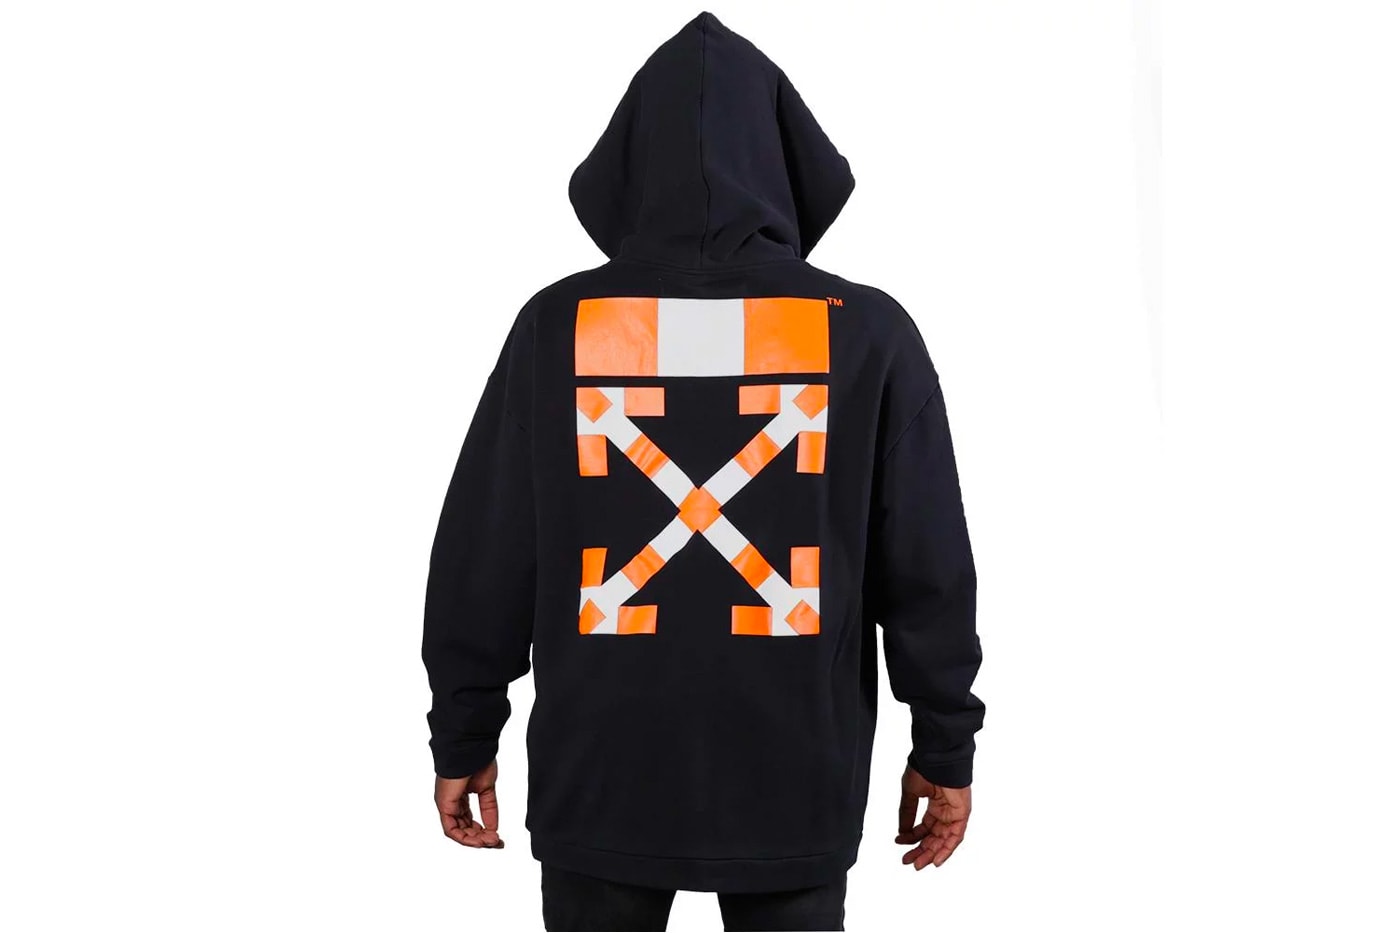 MCA Chicago Drops More Virgil Abloh Exhibition Apparel hoodie bernini caravaggio off white mona lisa socks industrial belt t-shirts drop date release info buy now anorak 